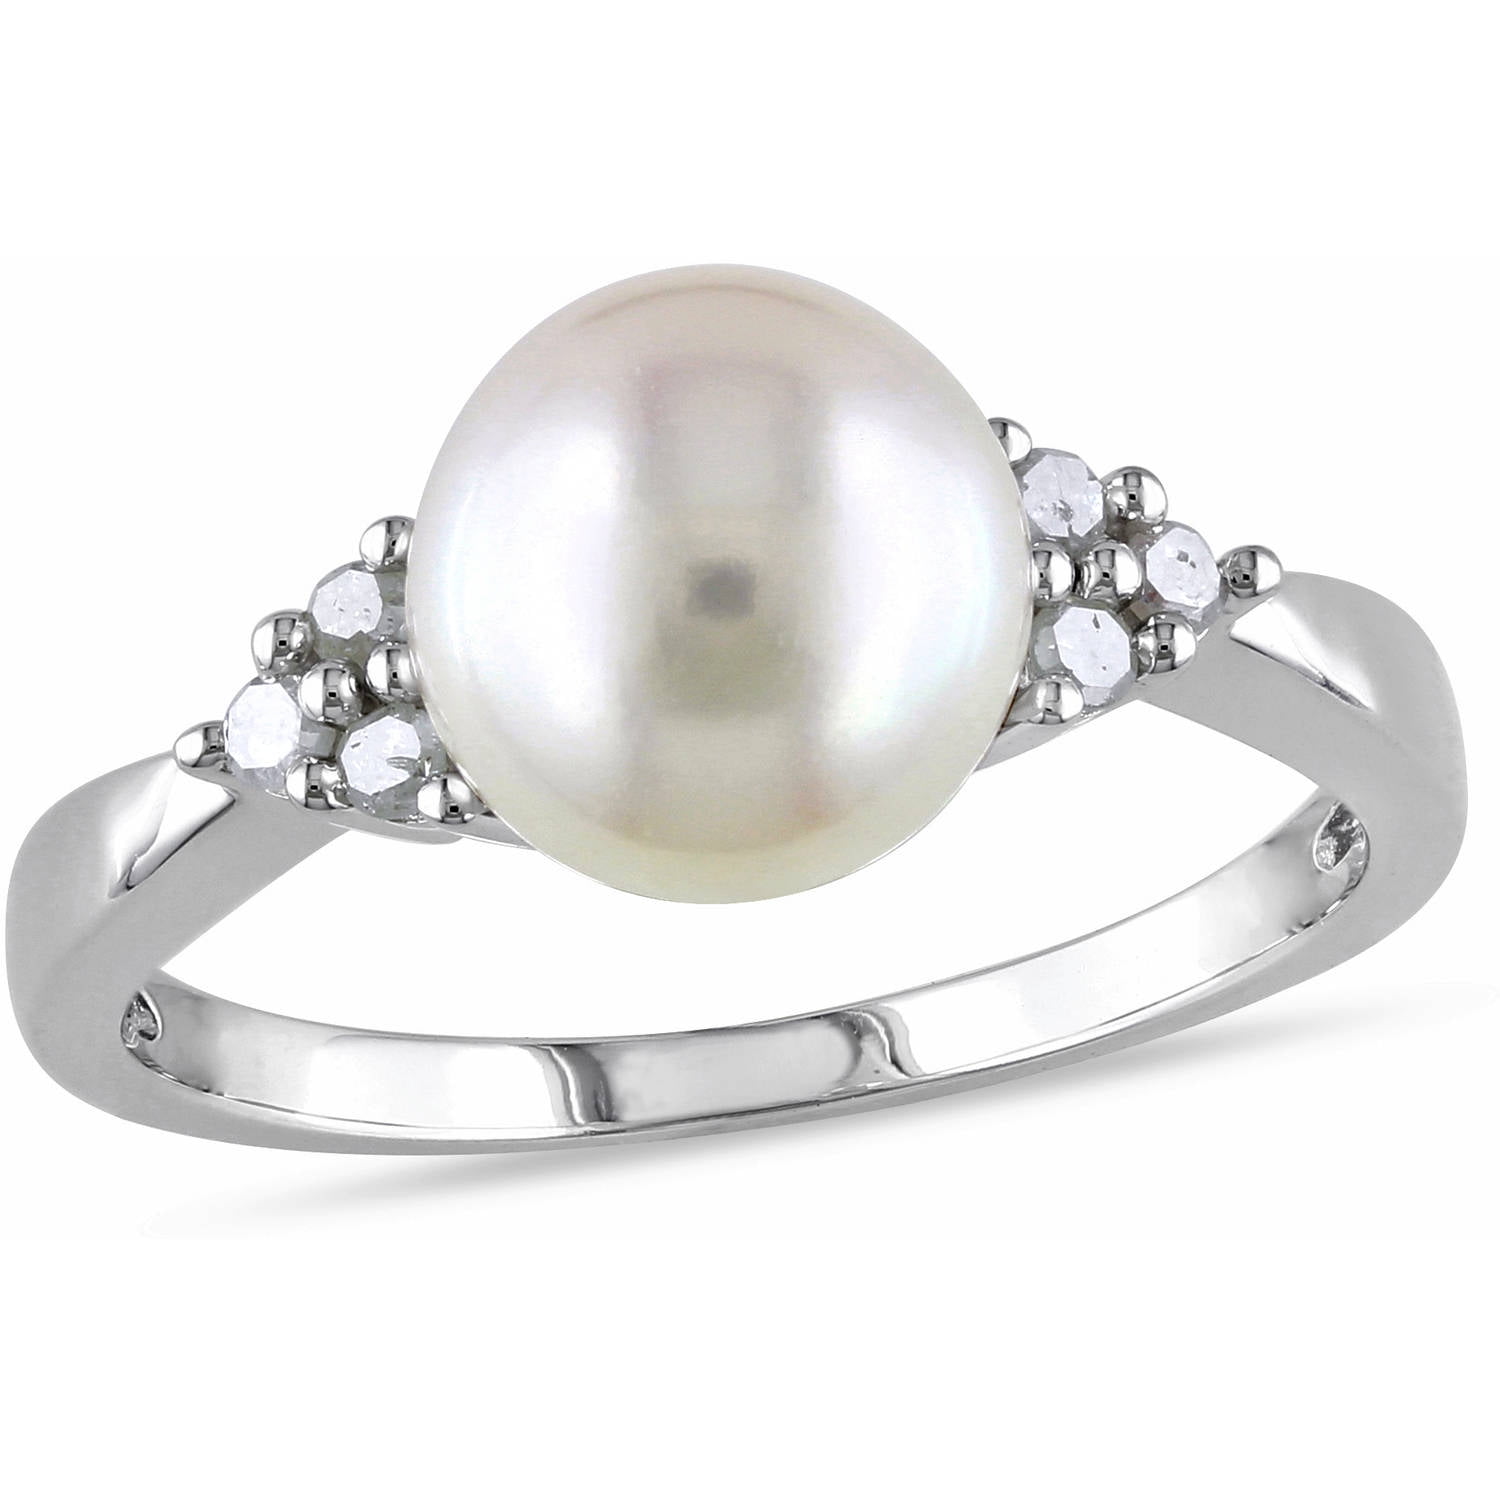 Details about   Freshwater Cultured Pearl & 1/8 CTW Diamond Ring In Sterling Silver 